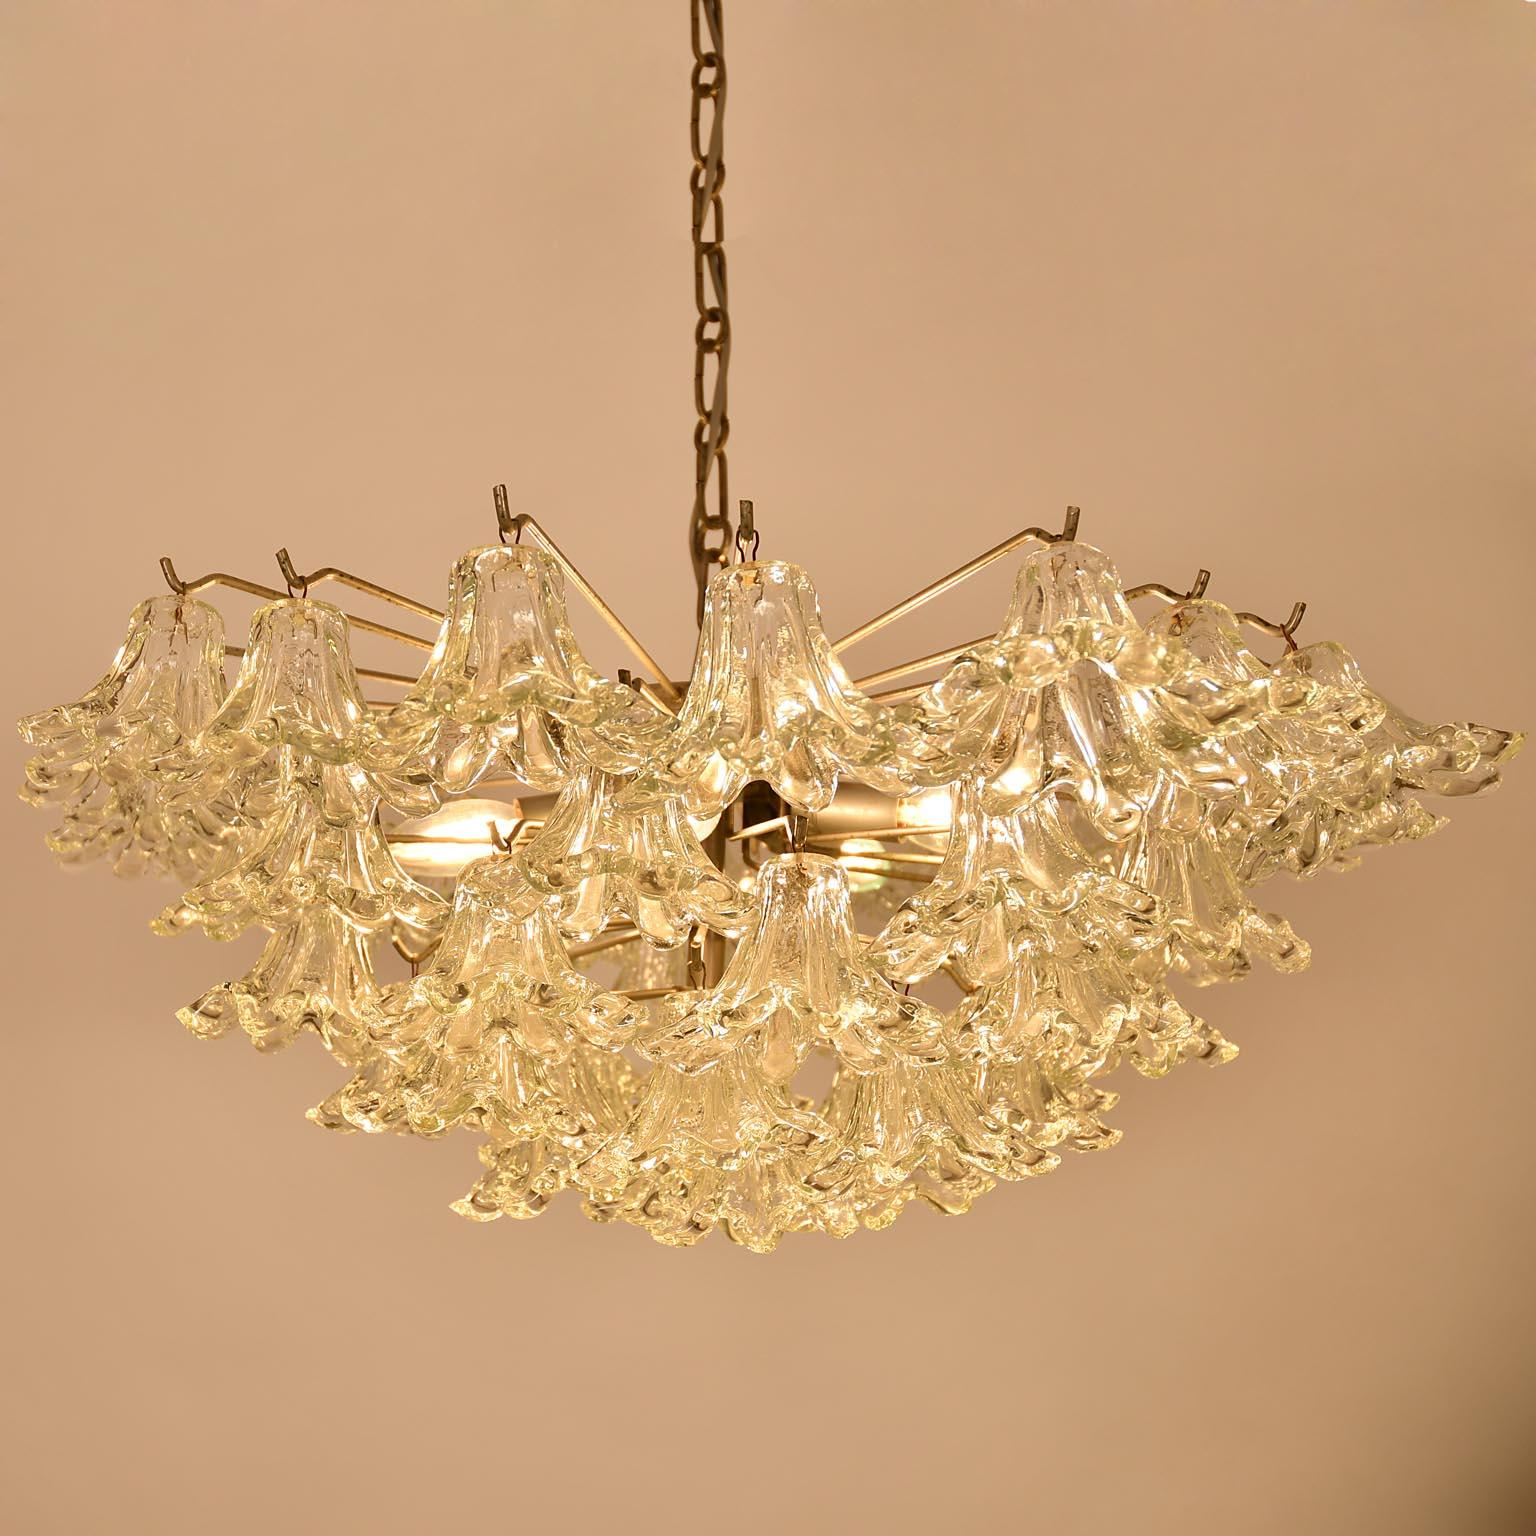 Metal Italian Mid-Century Chandelier with Glass Blossoms, 1955, Murano For Sale